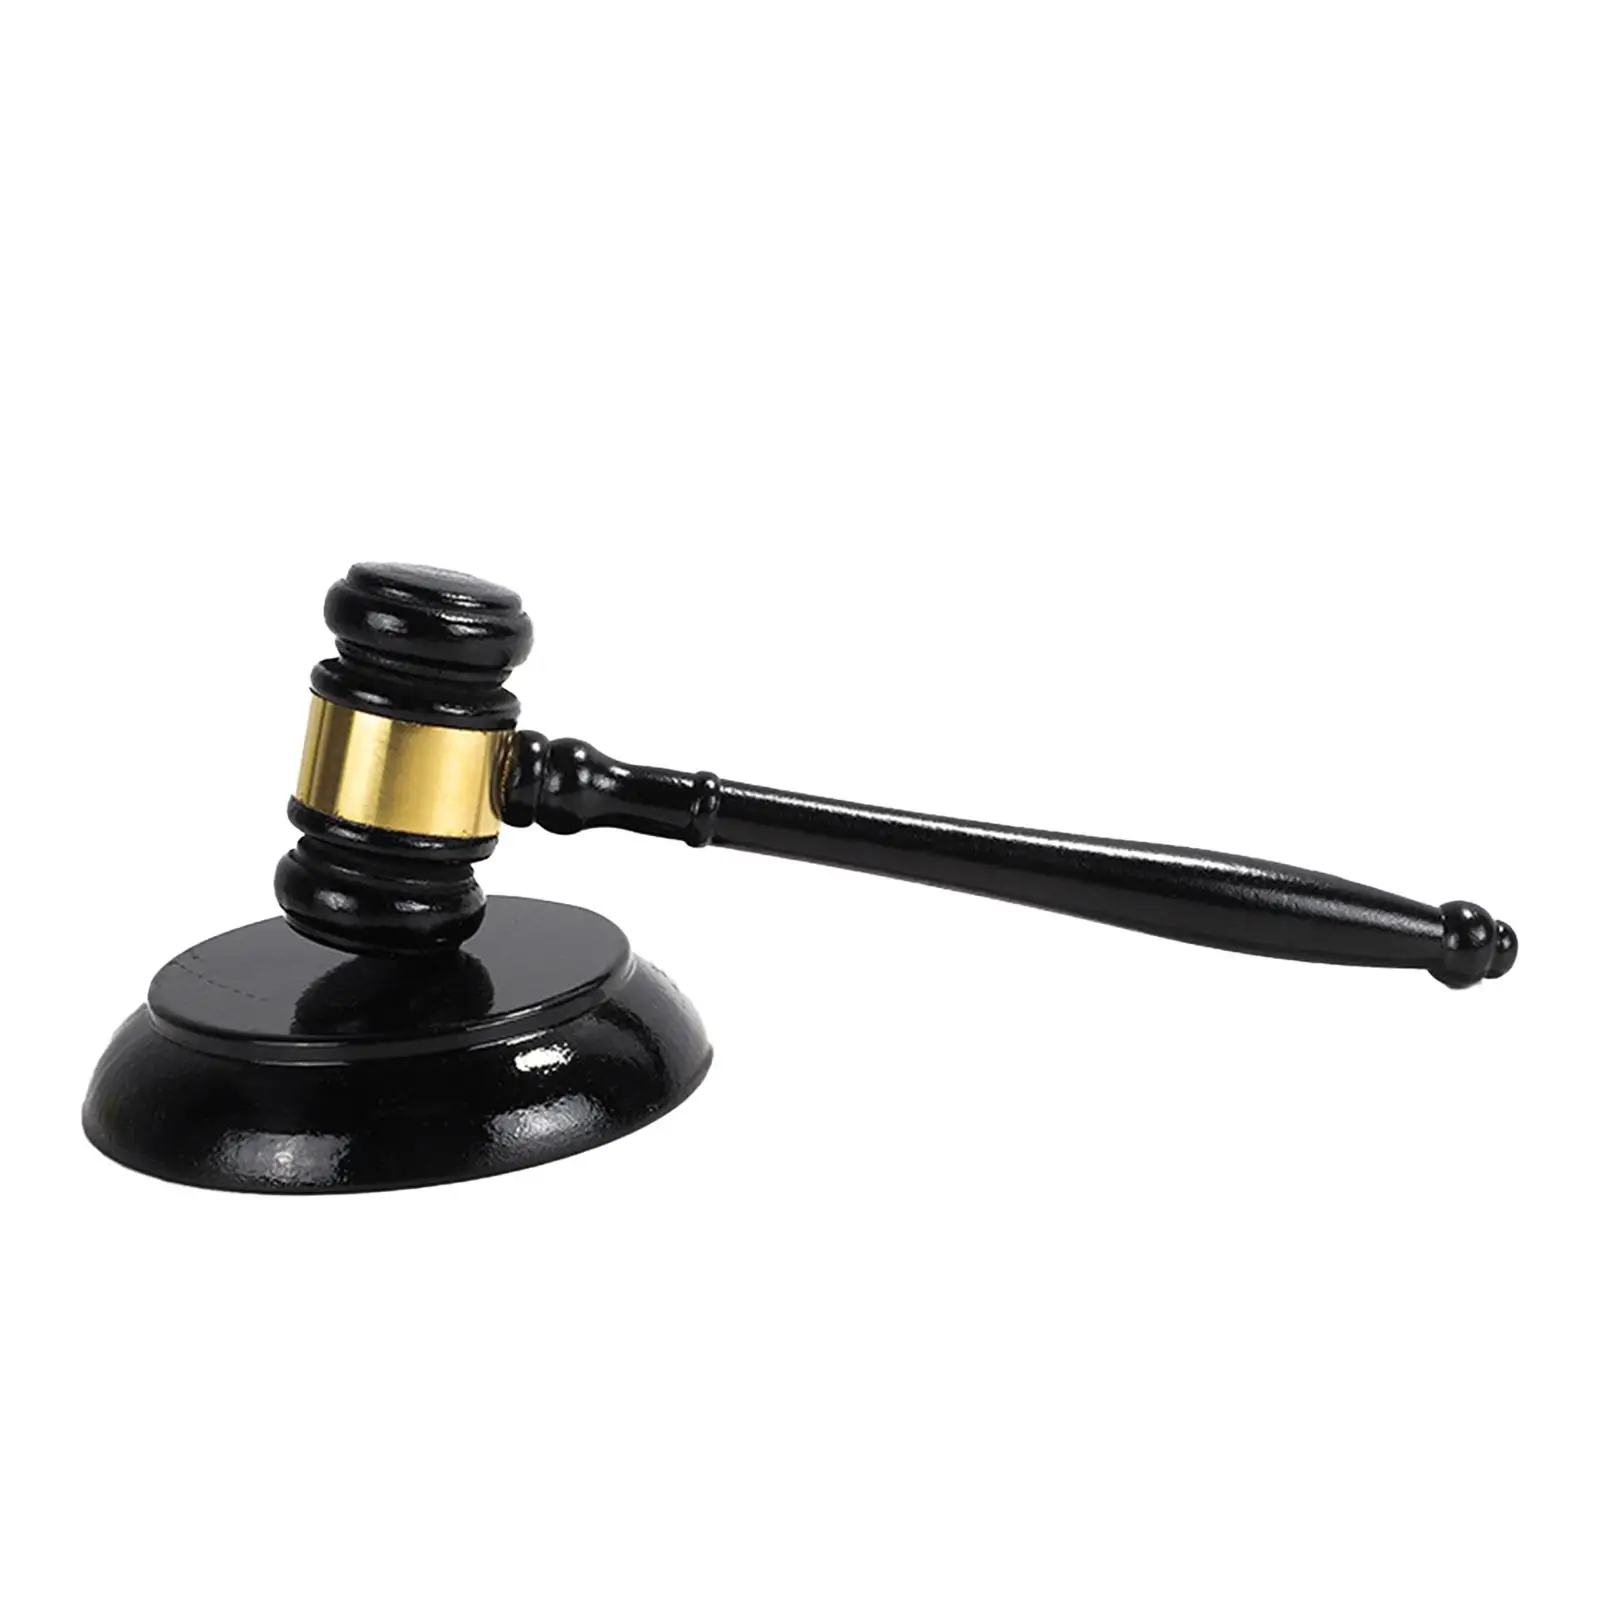 Wood Gavel and Block Set Gavel Toy for Costume Accessory Judge Unique Gifts